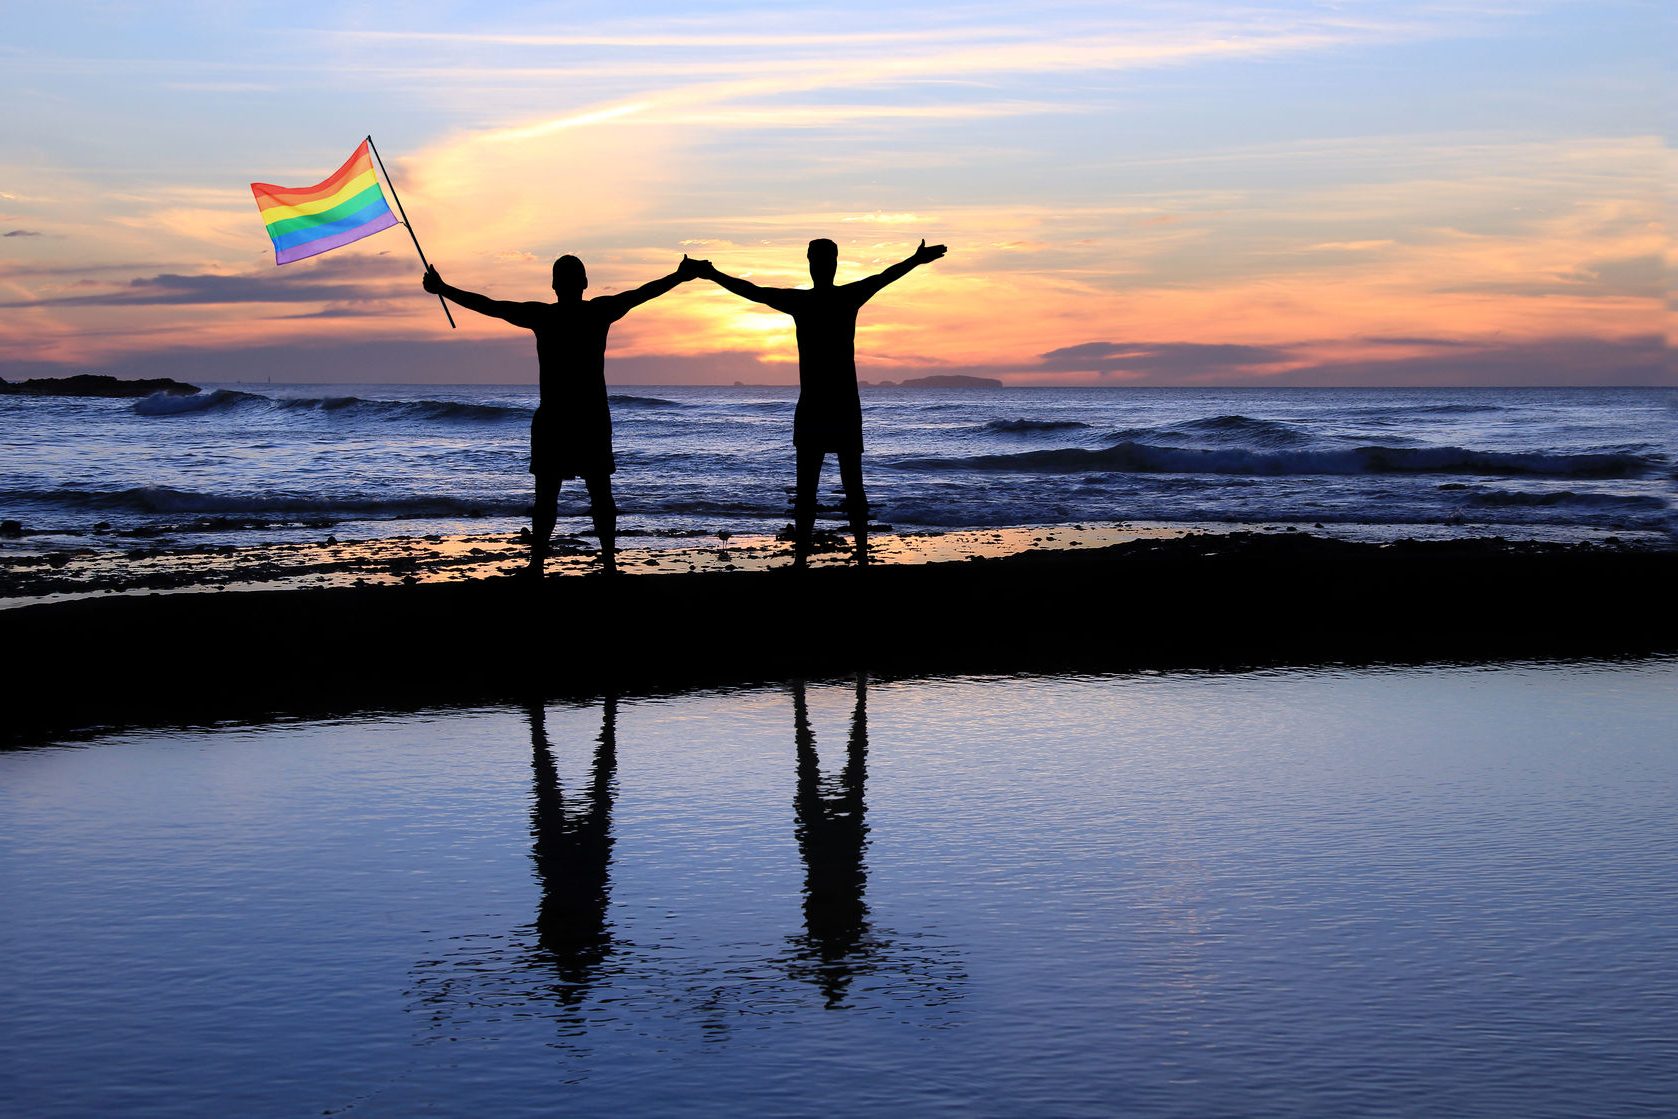 37337529 - silhouette of a gay couple holding a rainbow pride flag at sunset.